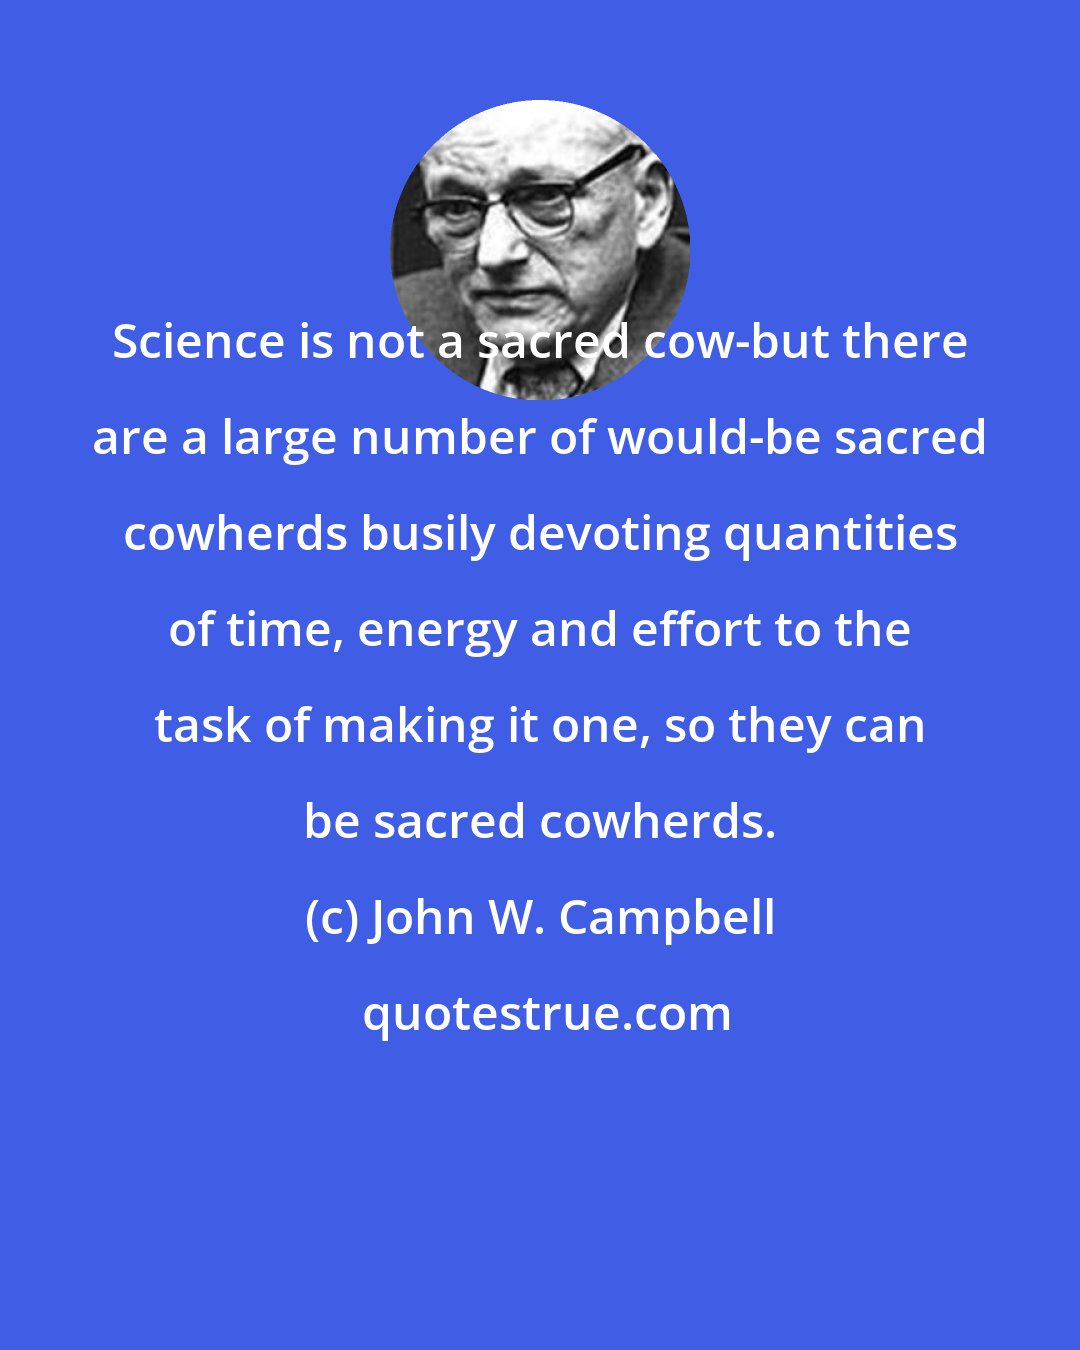 John W. Campbell: Science is not a sacred cow-but there are a large number of would-be sacred cowherds busily devoting quantities of time, energy and effort to the task of making it one, so they can be sacred cowherds.